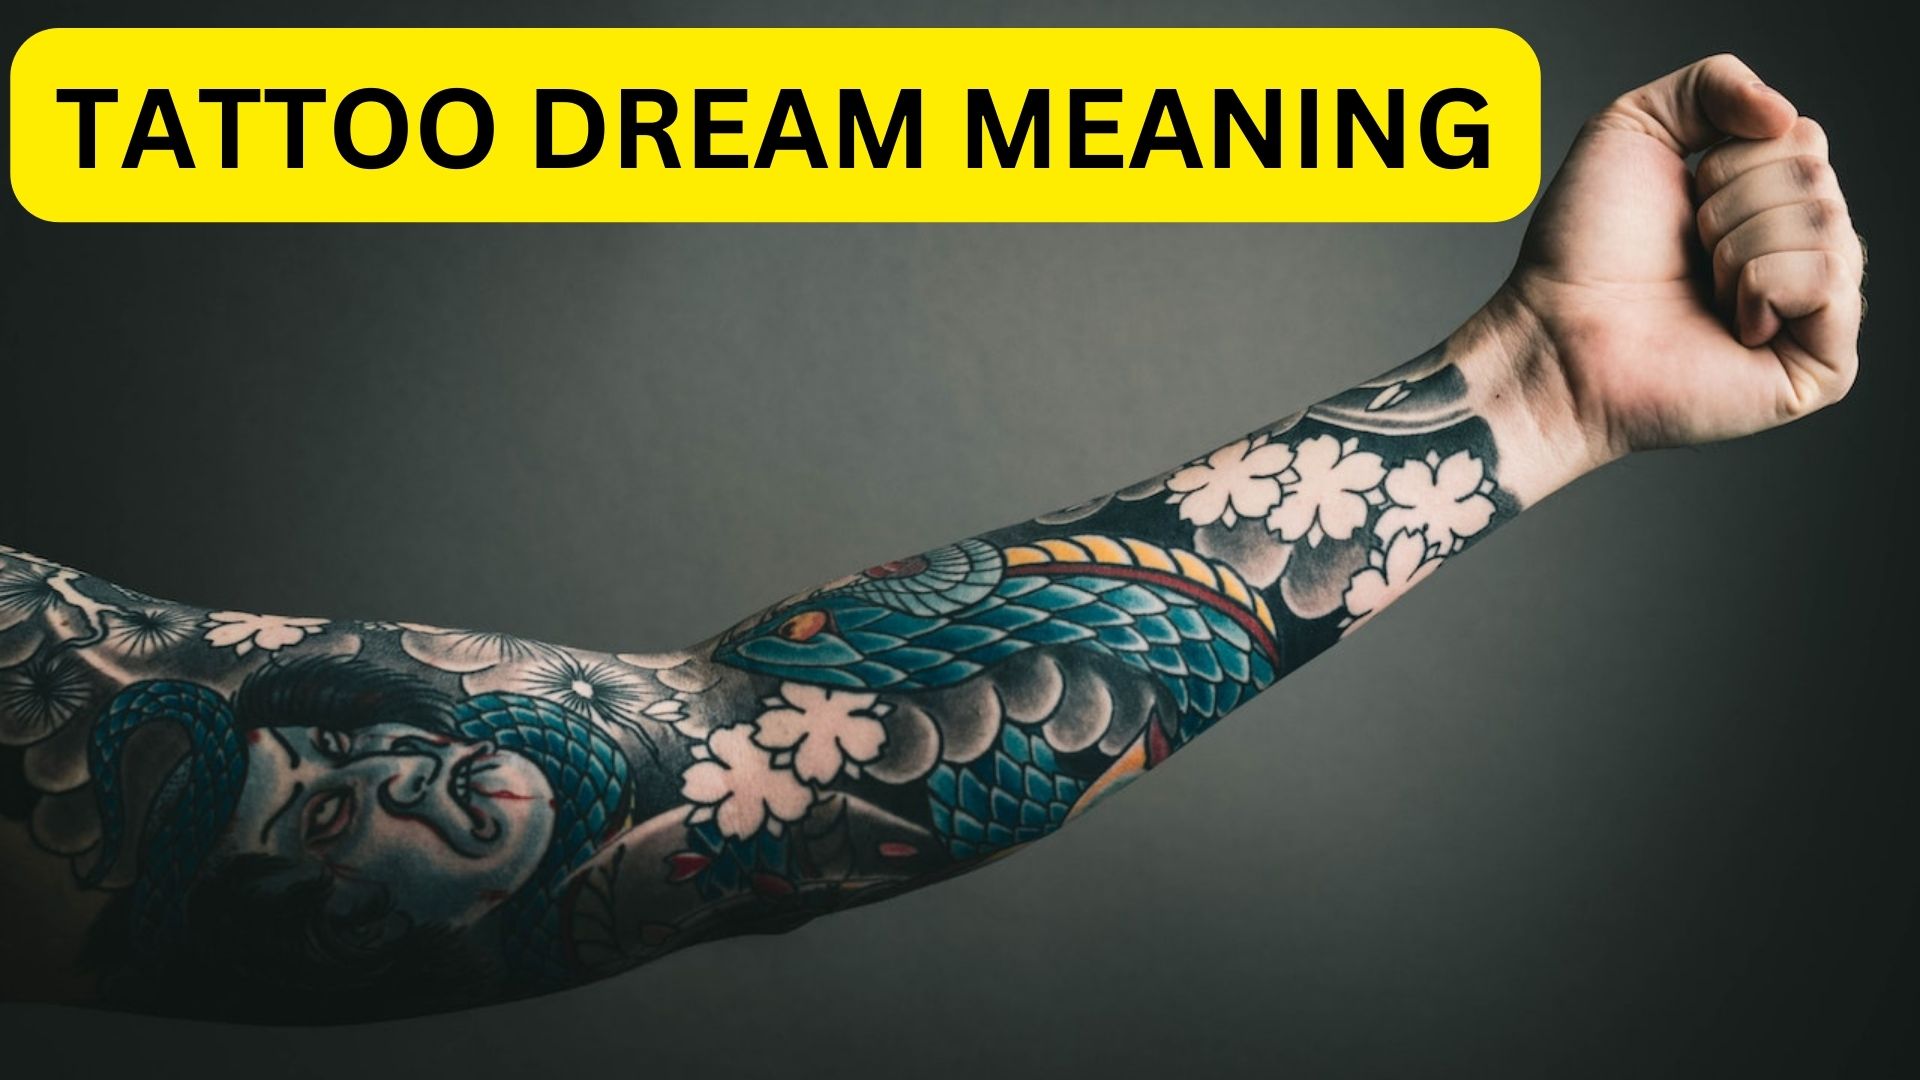 Tattoo Dream Meaning - A Sign Of A Spiritual Journey